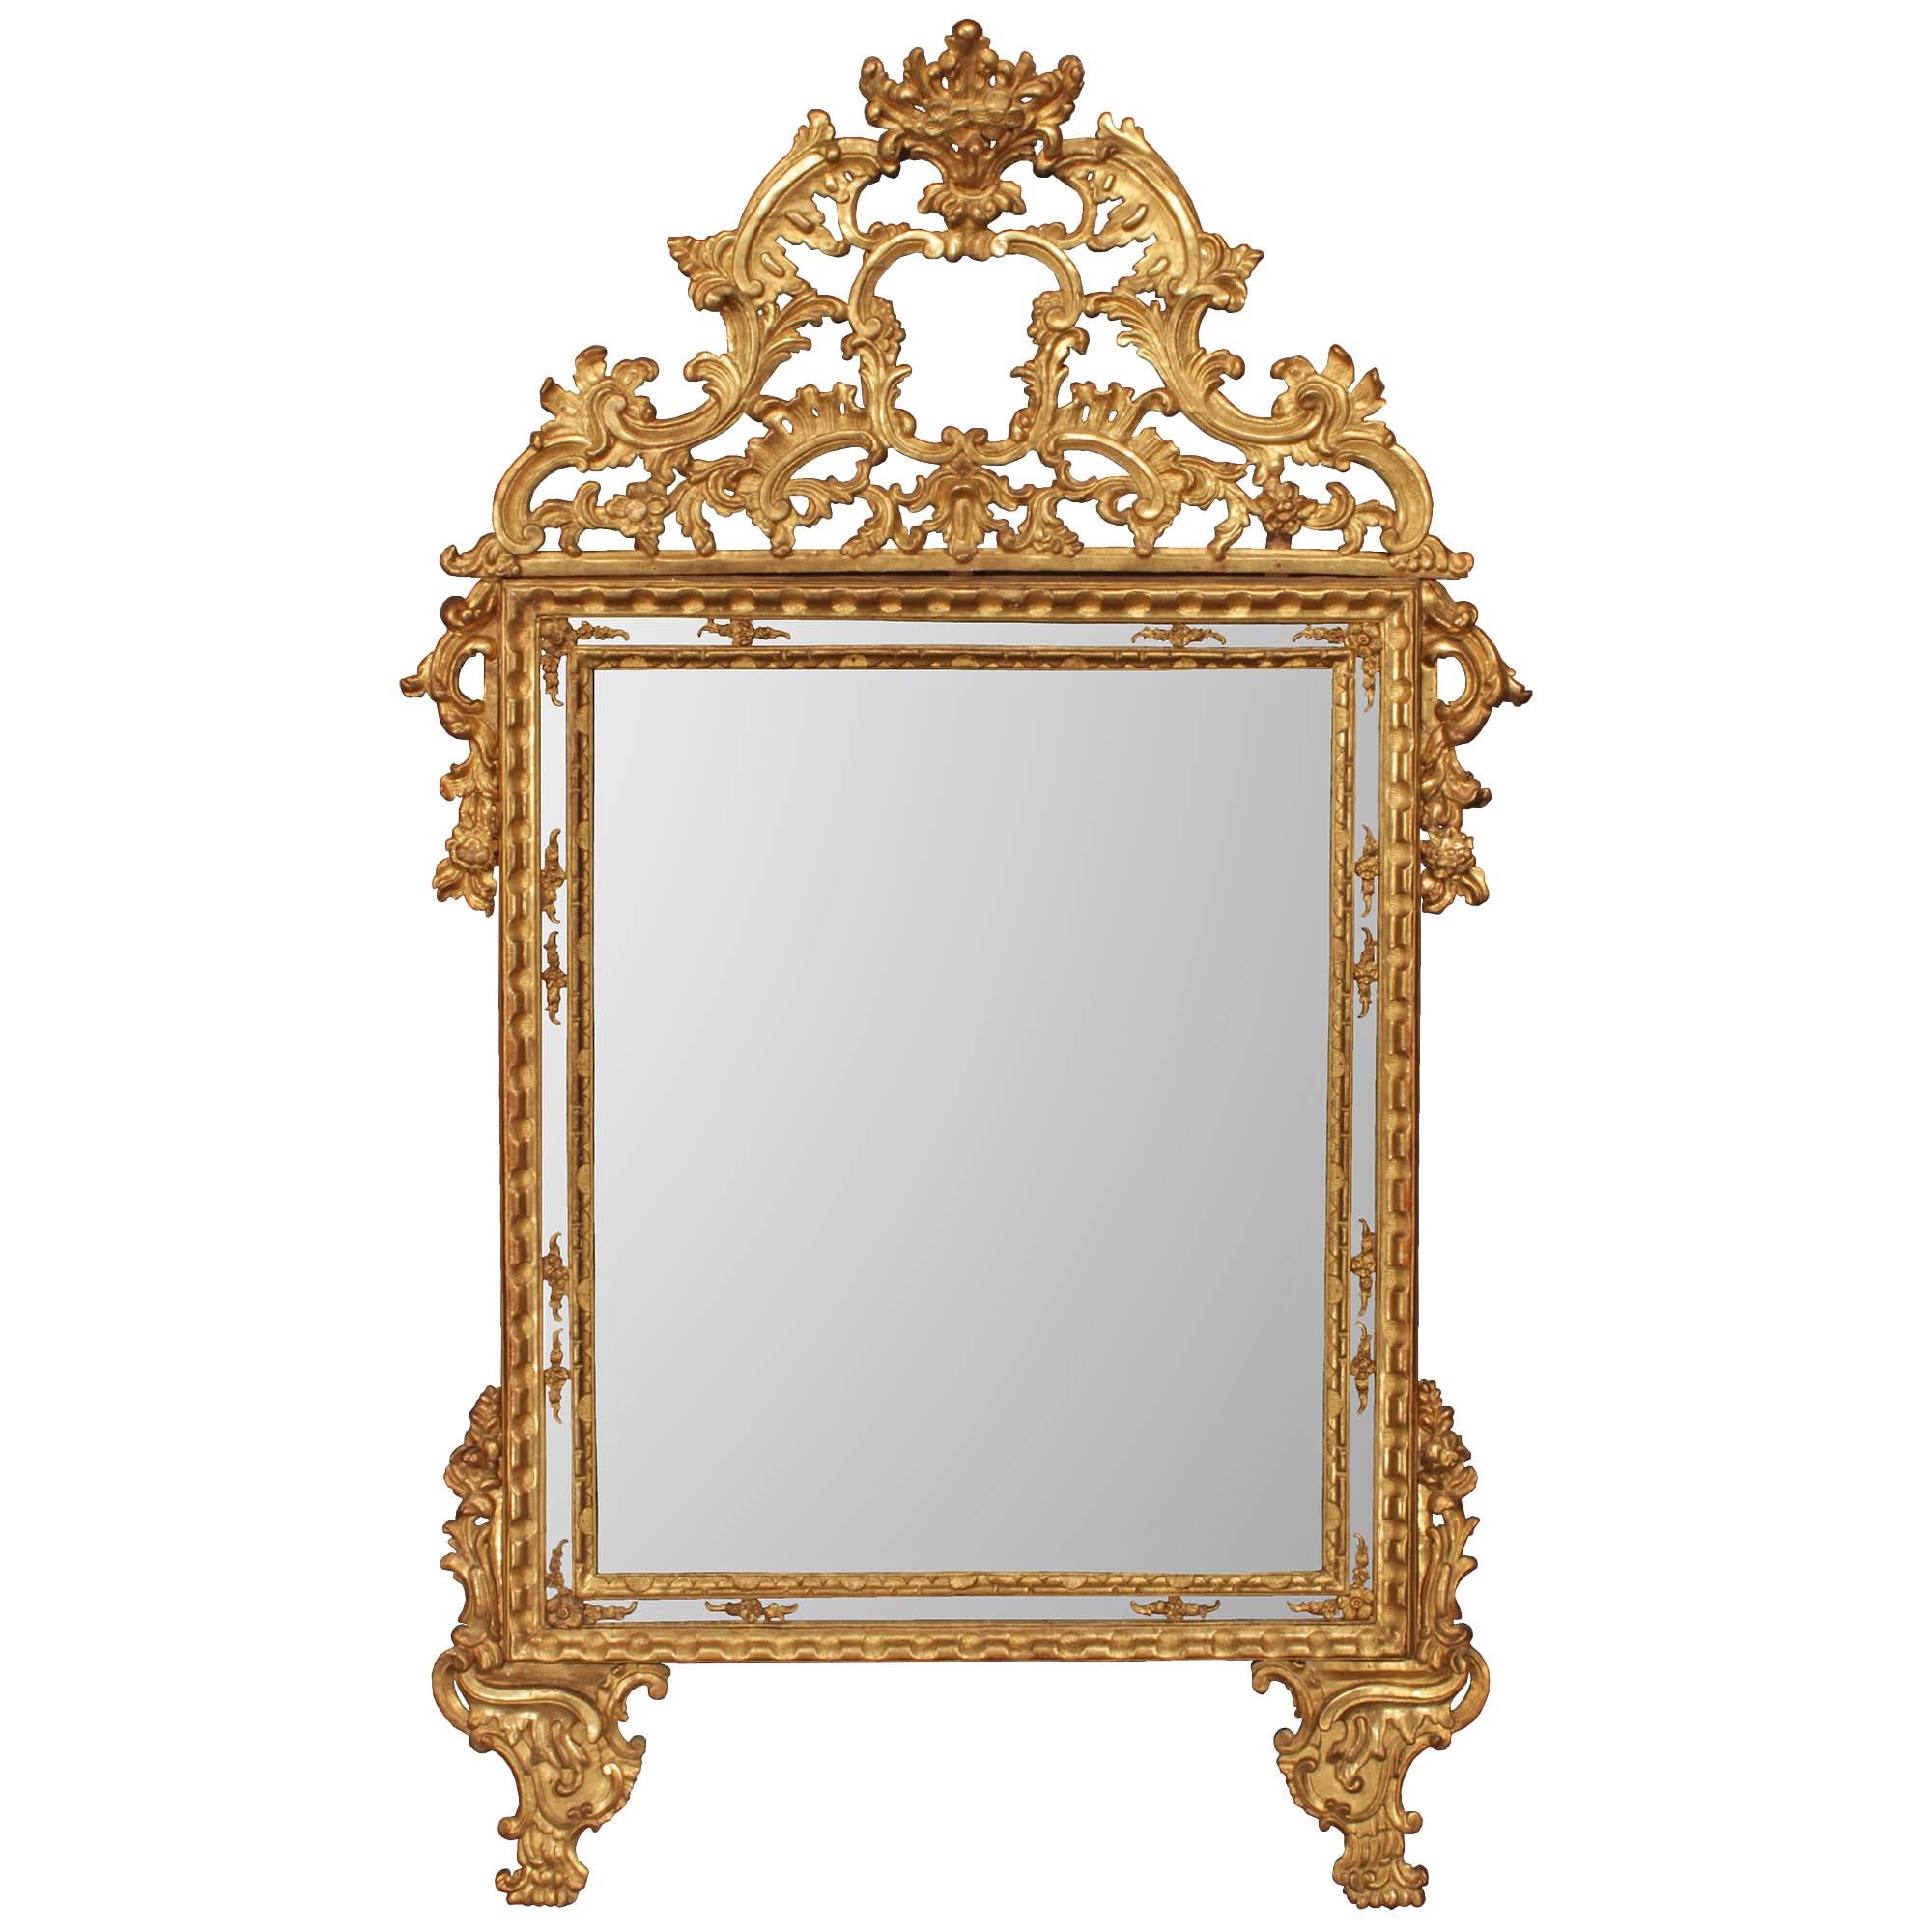 Italian 18th Century Louis XIV Period Double Framed Giltwood Mirror For Sale